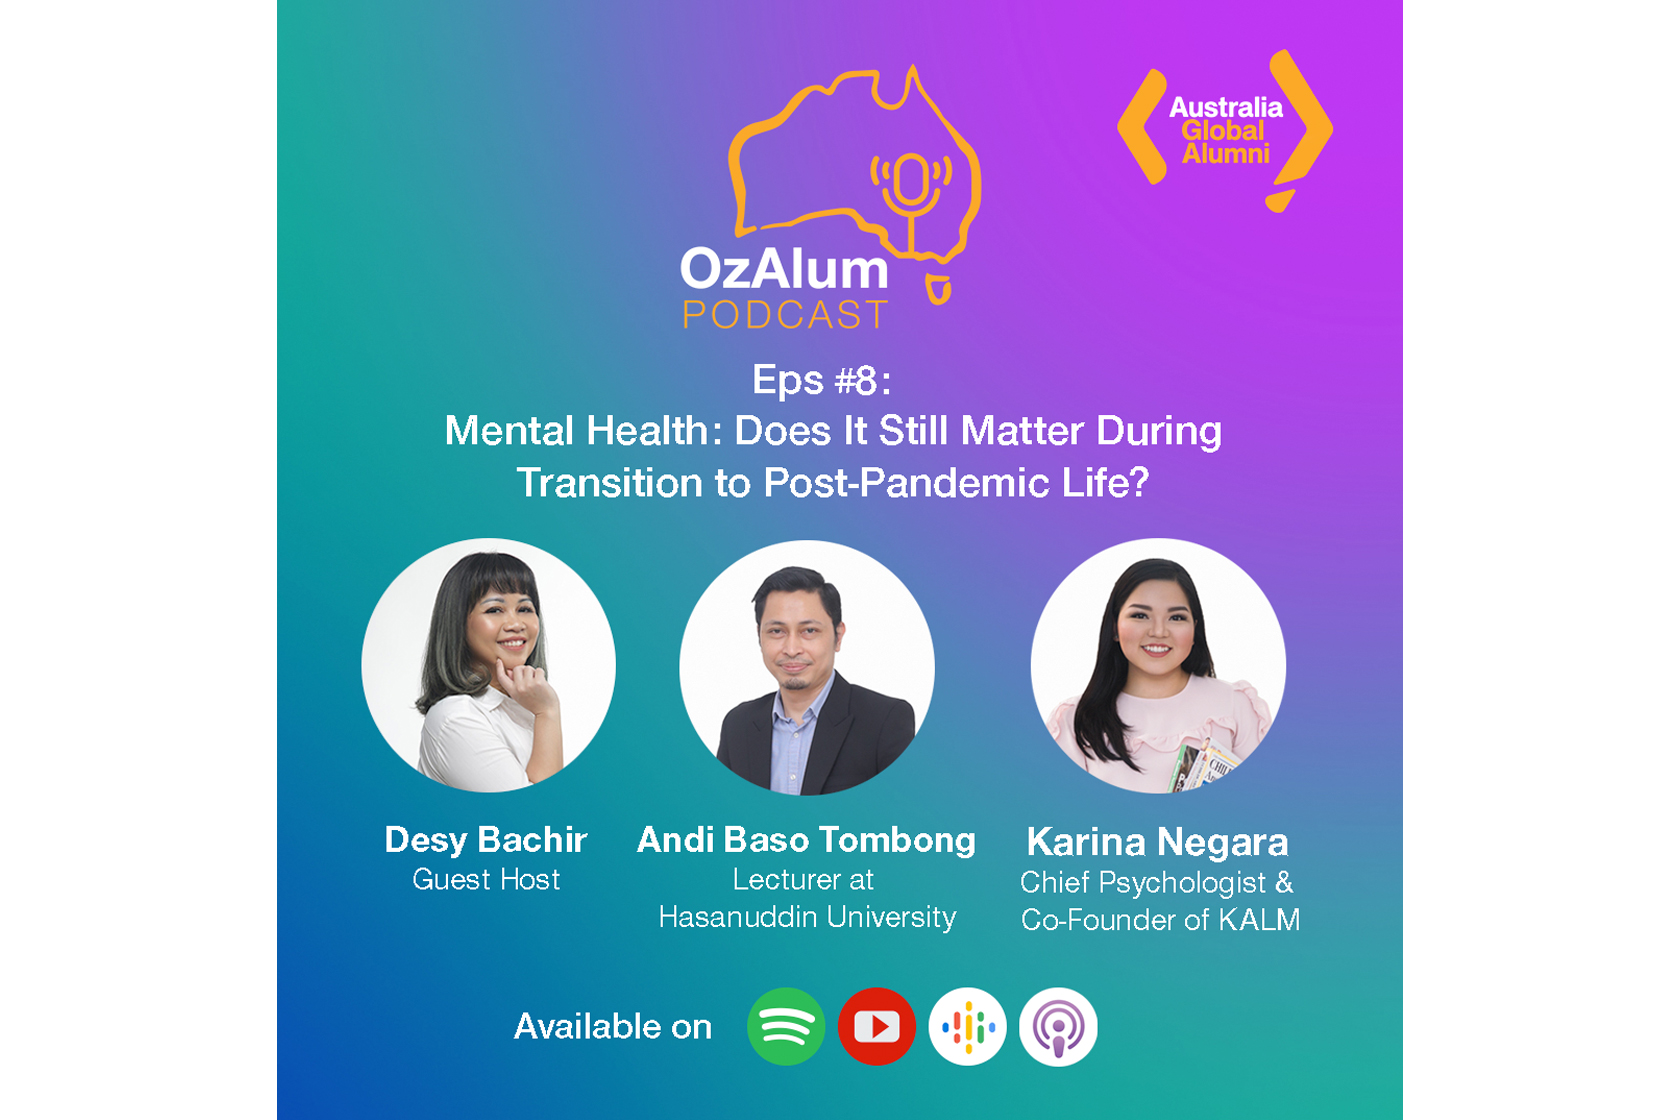 OzAlum Podcast Ep #8: Mental Health: Does It Still Matter During Transition to Post-Pandemic Life?